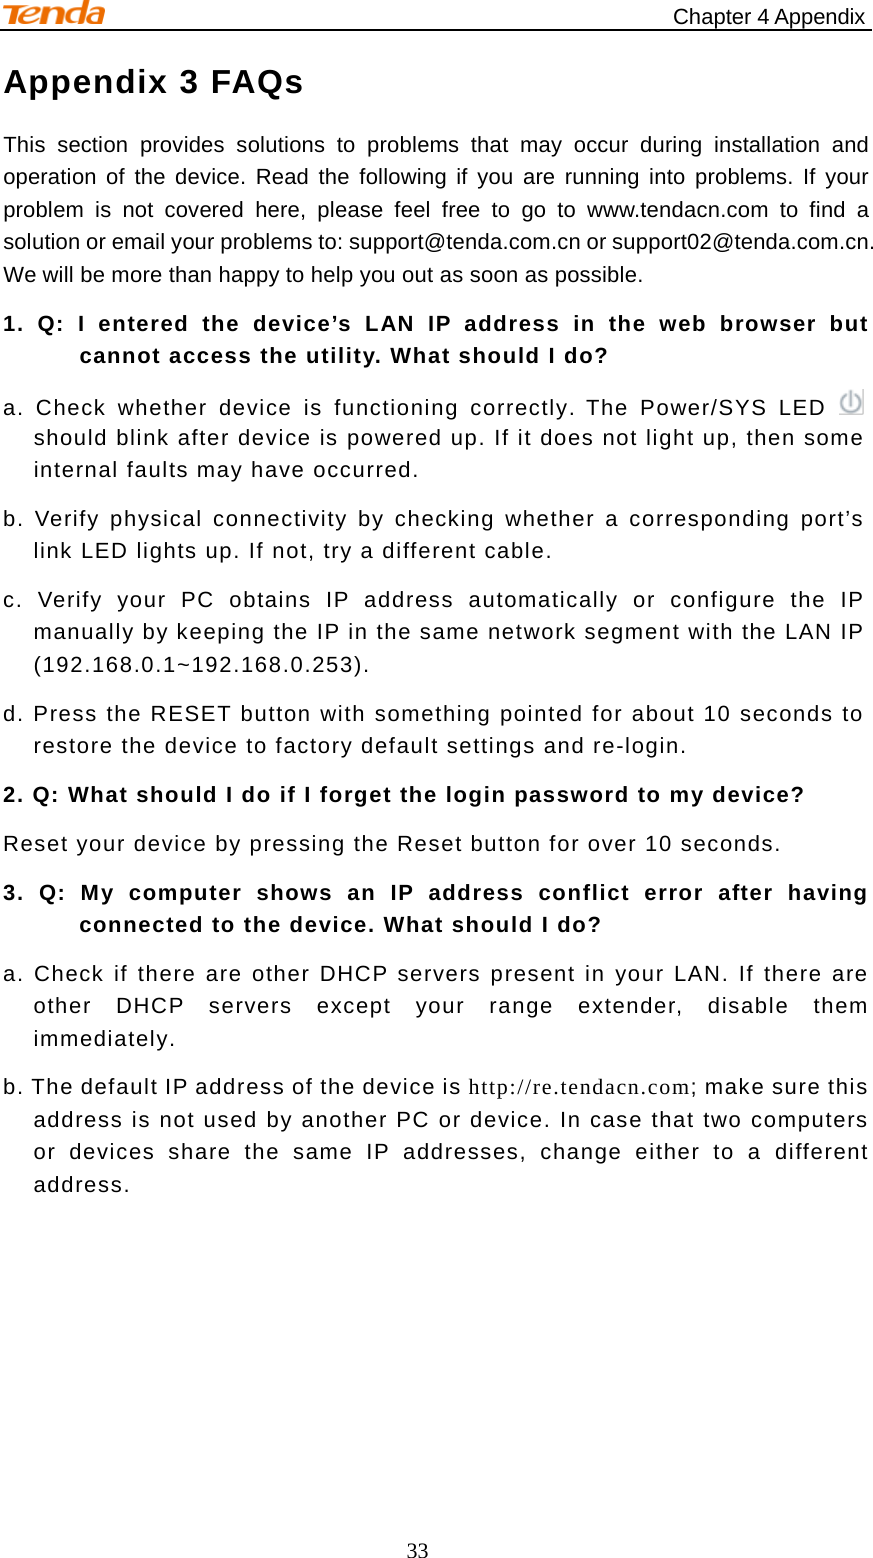                                                     Chapter 4 Appendix 33 Appendix 3 FAQs This section provides solutions to problems that may occur during installation and operation of the device. Read the following if you are running into problems. If your problem is not covered here, please feel free to go to www.tendacn.com to find a solution or email your problems to: support@tenda.com.cn or support02@tenda.com.cn. We will be more than happy to help you out as soon as possible. 1. Q: I entered the device’s LAN IP address in the web browser but cannot access the utility. What should I do? a. Check whether device is functioning correctly. The Power/SYS LED    should blink after device is powered up. If it does not light up, then some internal faults may have occurred. b. Verify physical connectivity by checking whether a corresponding port’s link LED lights up. If not, try a different cable.   c. Verify your PC obtains IP address automatically or configure the IP manually by keeping the IP in the same network segment with the LAN IP (192.168.0.1~192.168.0.253). d. Press the RESET button with something pointed for about 10 seconds to restore the device to factory default settings and re-login. 2. Q: What should I do if I forget the login password to my device? Reset your device by pressing the Reset button for over 10 seconds. 3. Q: My computer shows an IP address conflict error after having connected to the device. What should I do? a. Check if there are other DHCP servers present in your LAN. If there are other DHCP servers except your range extender, disable them immediately. b. The default IP address of the device is http://re.tendacn.com; make sure this address is not used by another PC or device. In case that two computers or devices share the same IP addresses, change either to a different address.    